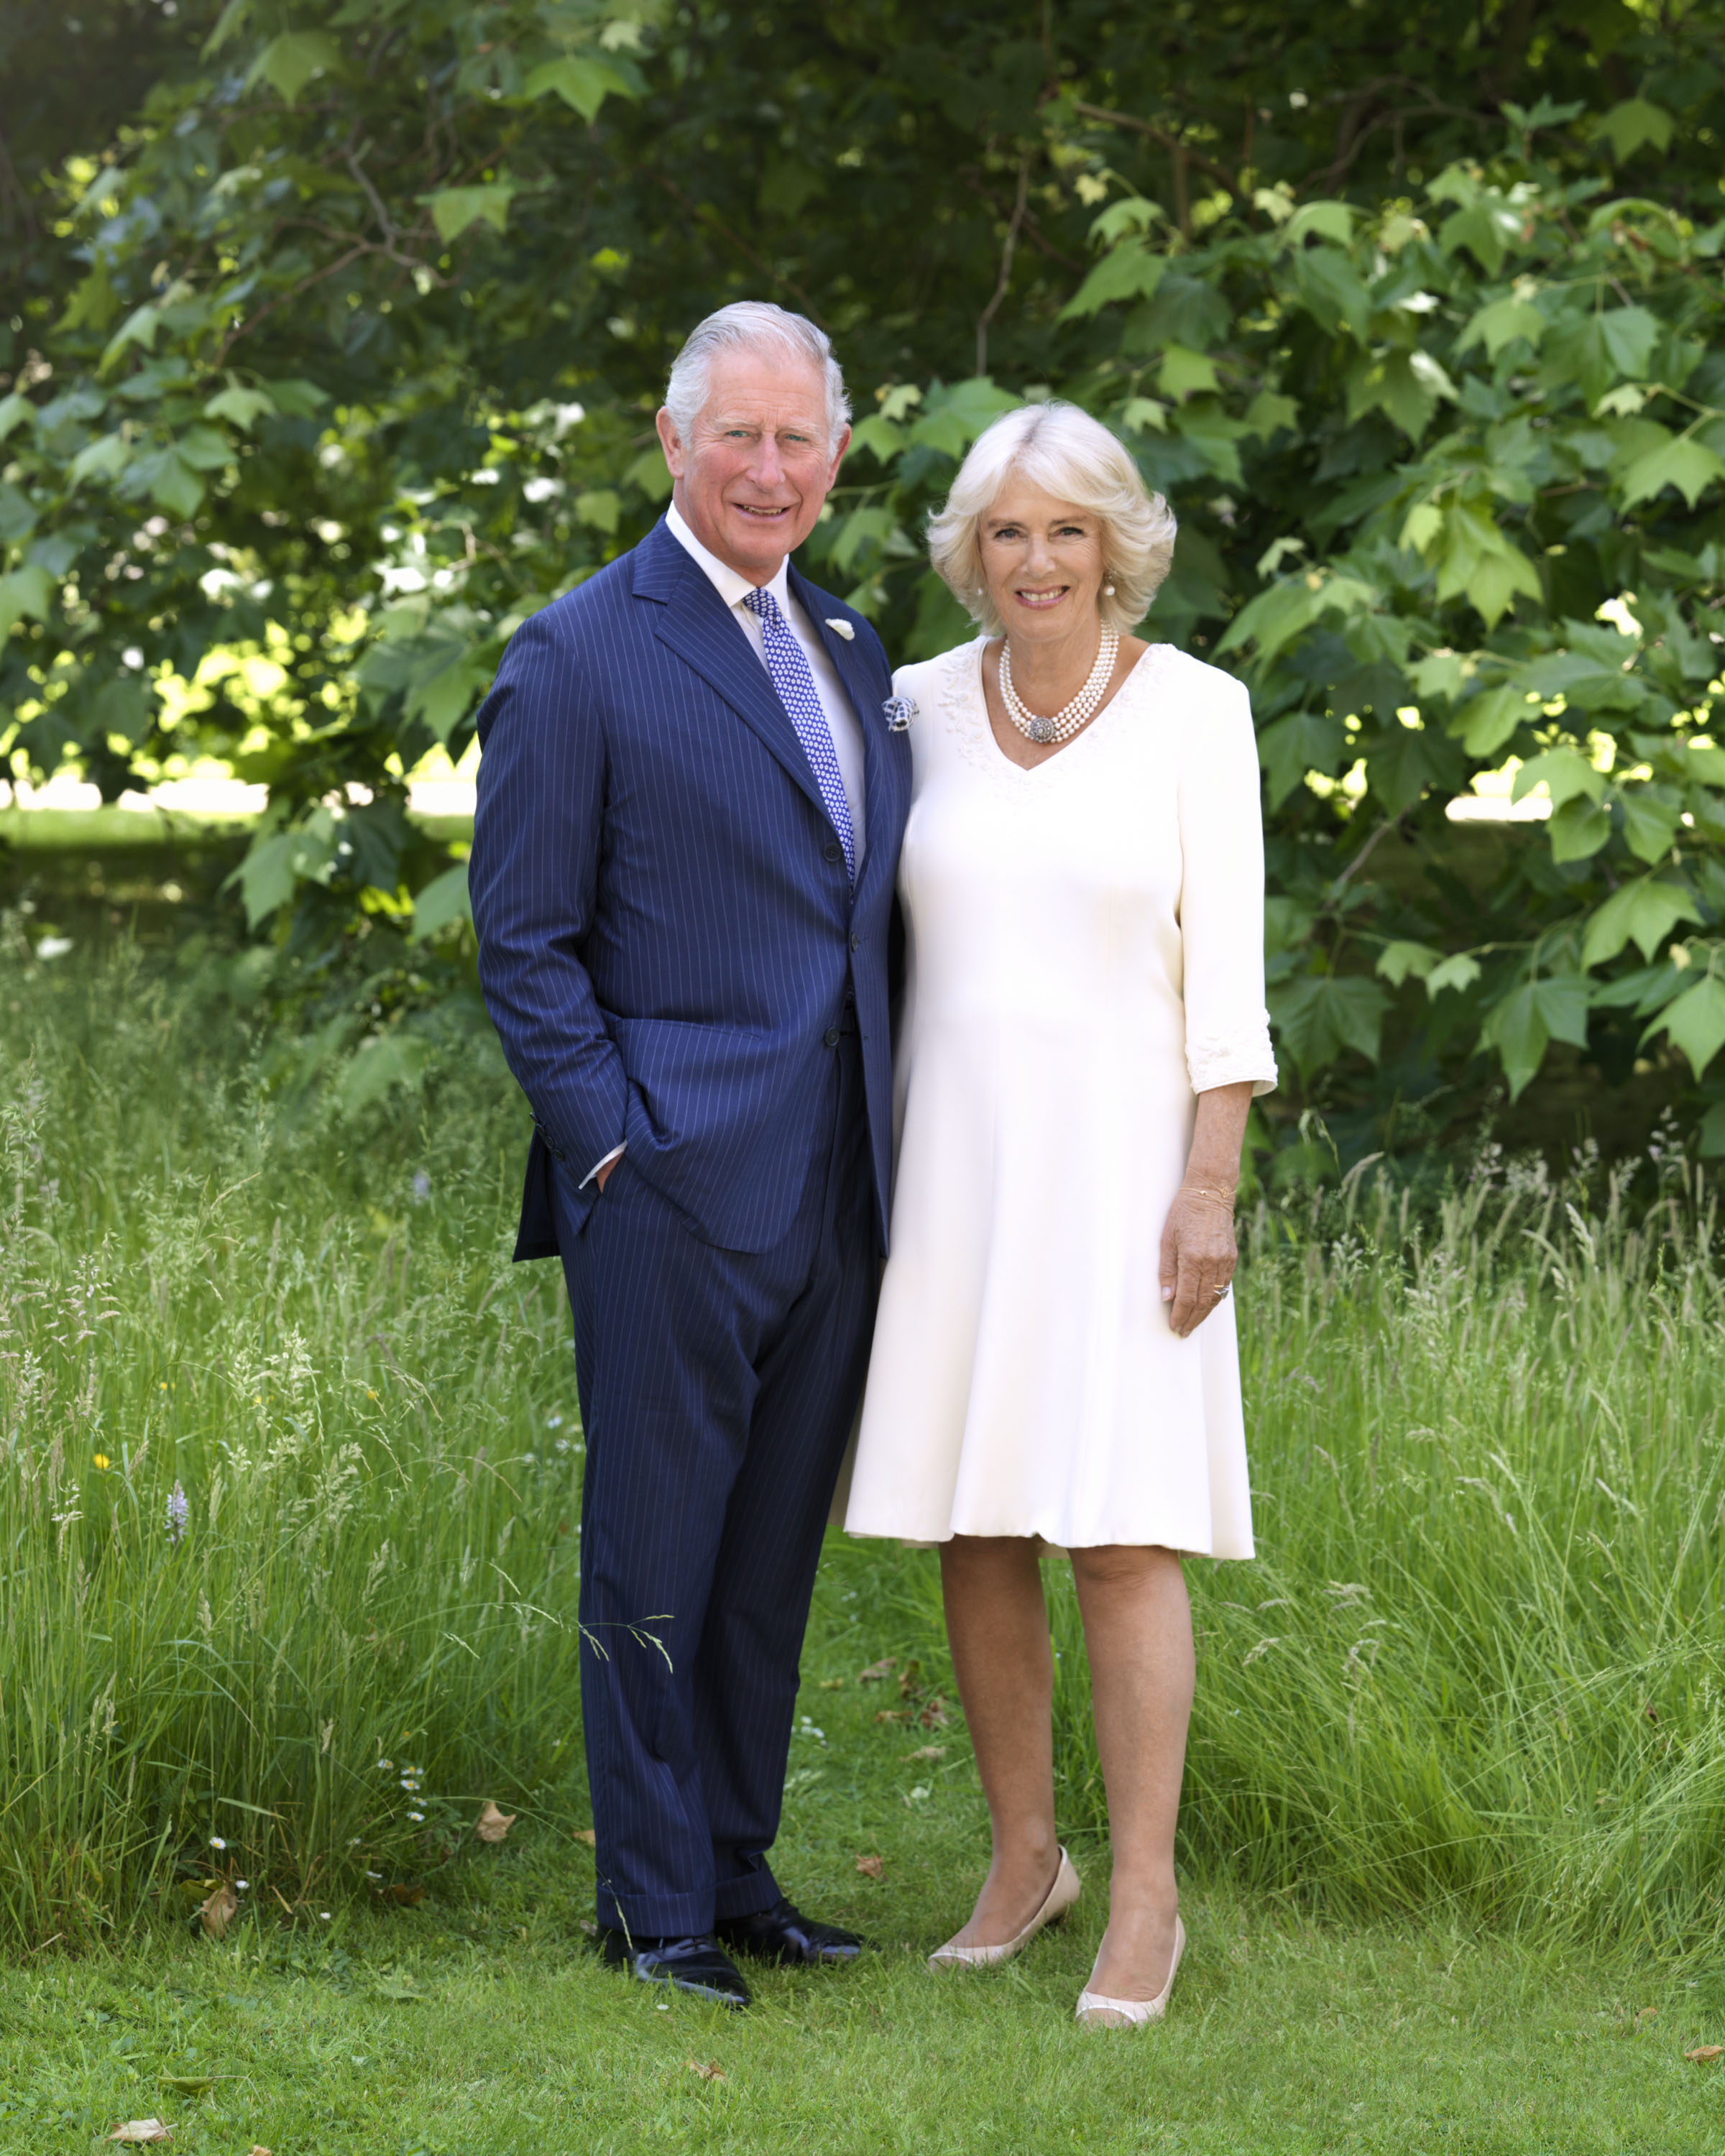 The Prince of Wales and The Duchess of Cornwall will pay an official visit to the Cayman Islands on 27 and 28 March.